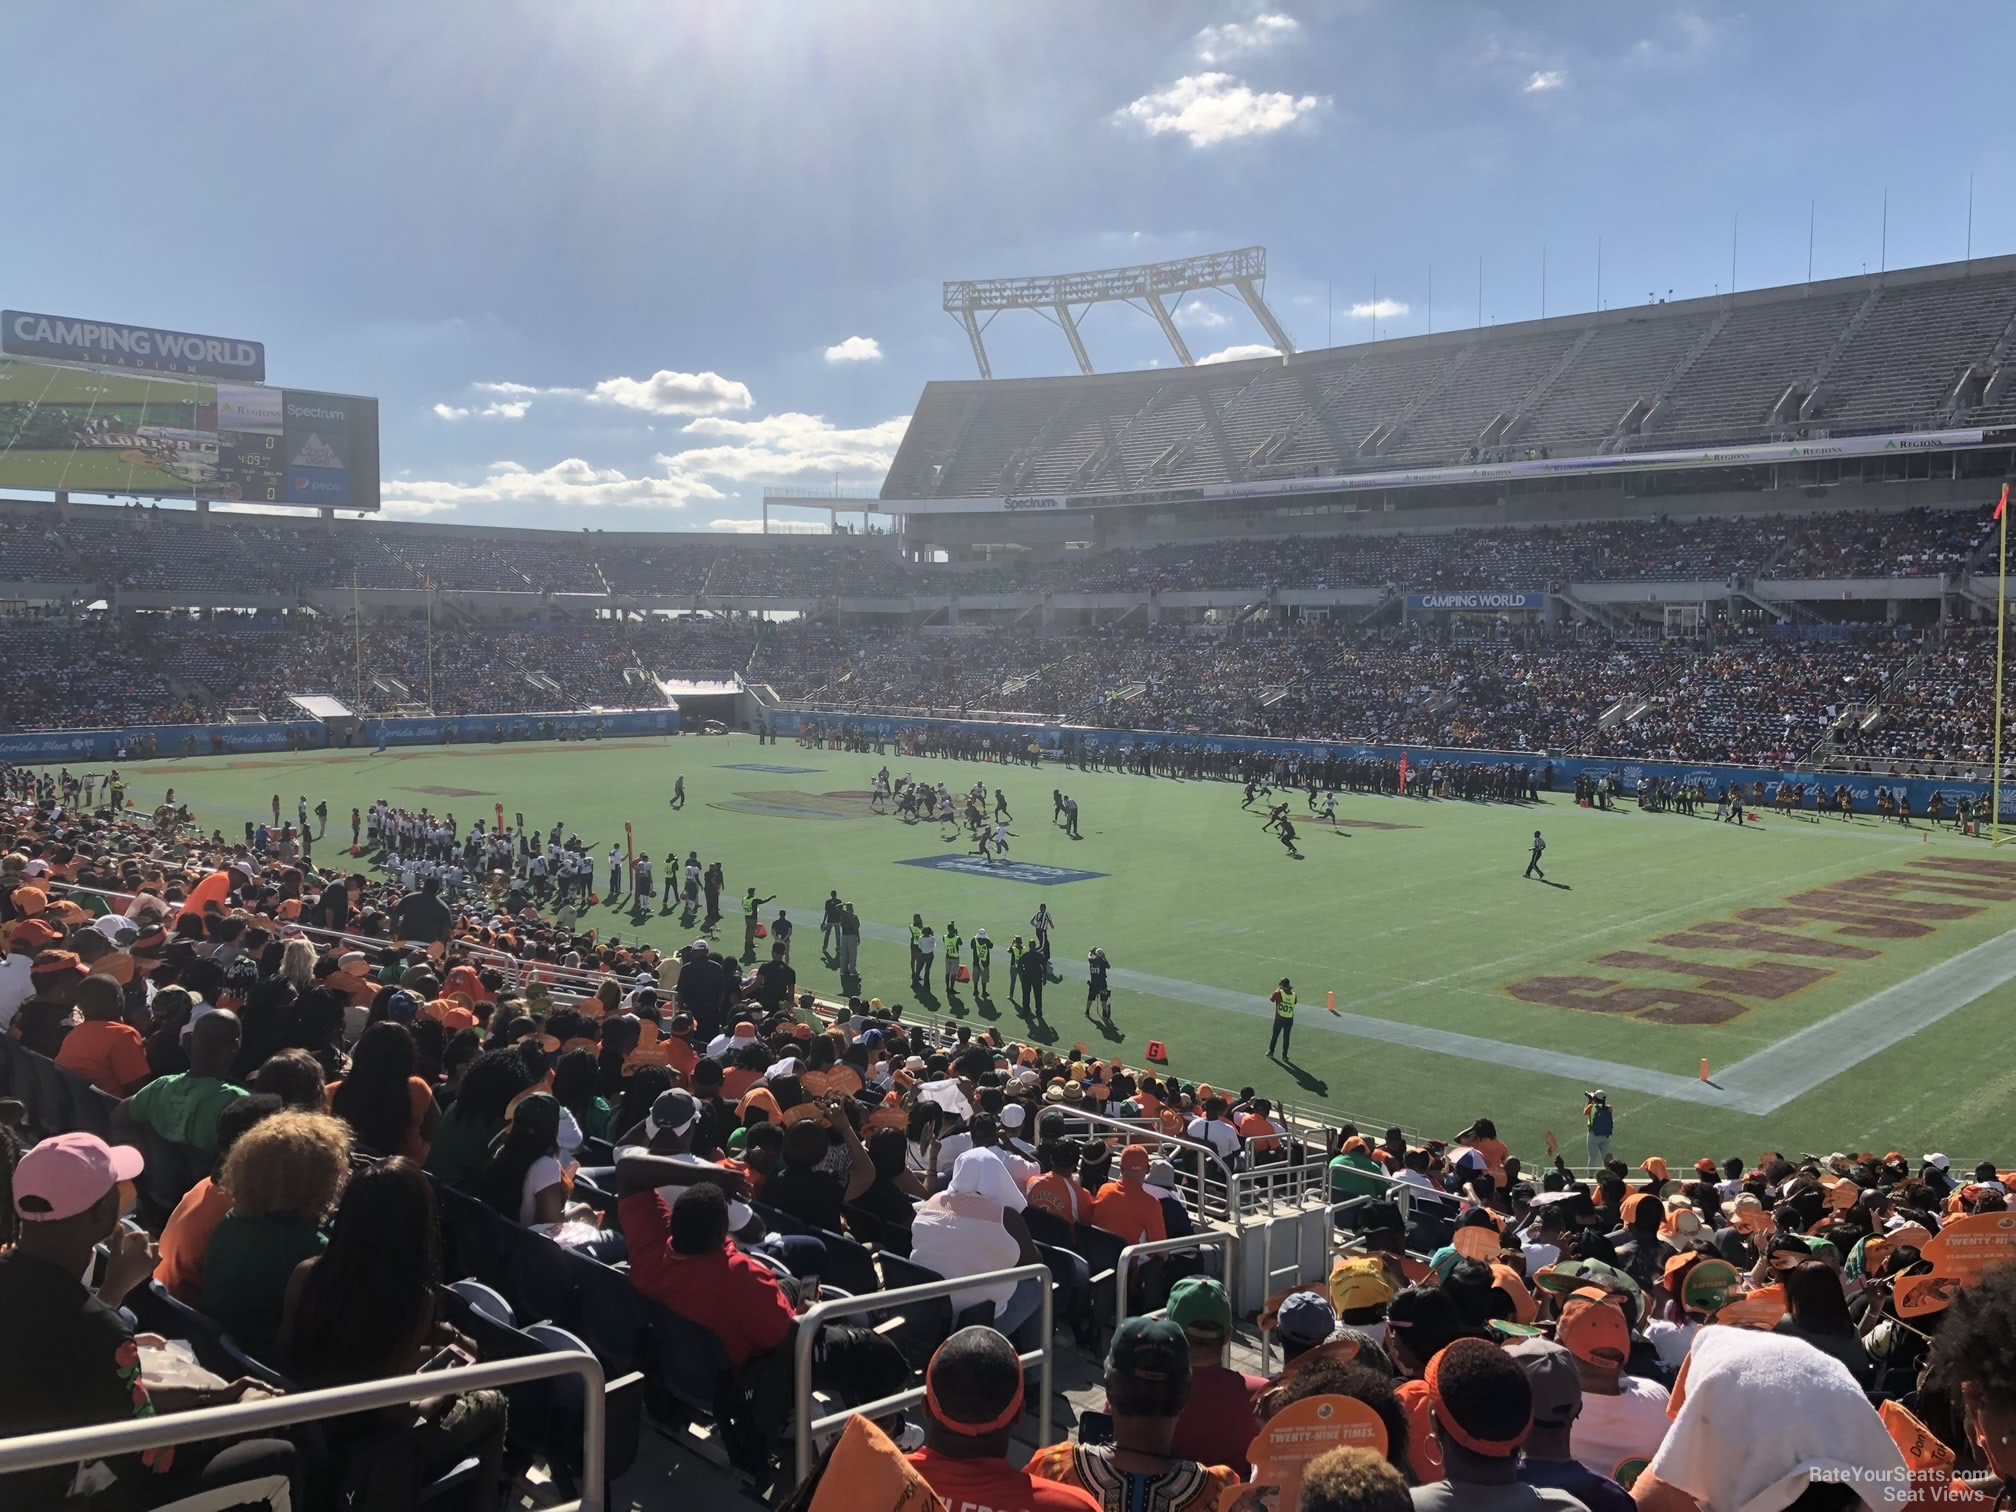 section 151, row ee seat view  for football - camping world stadium